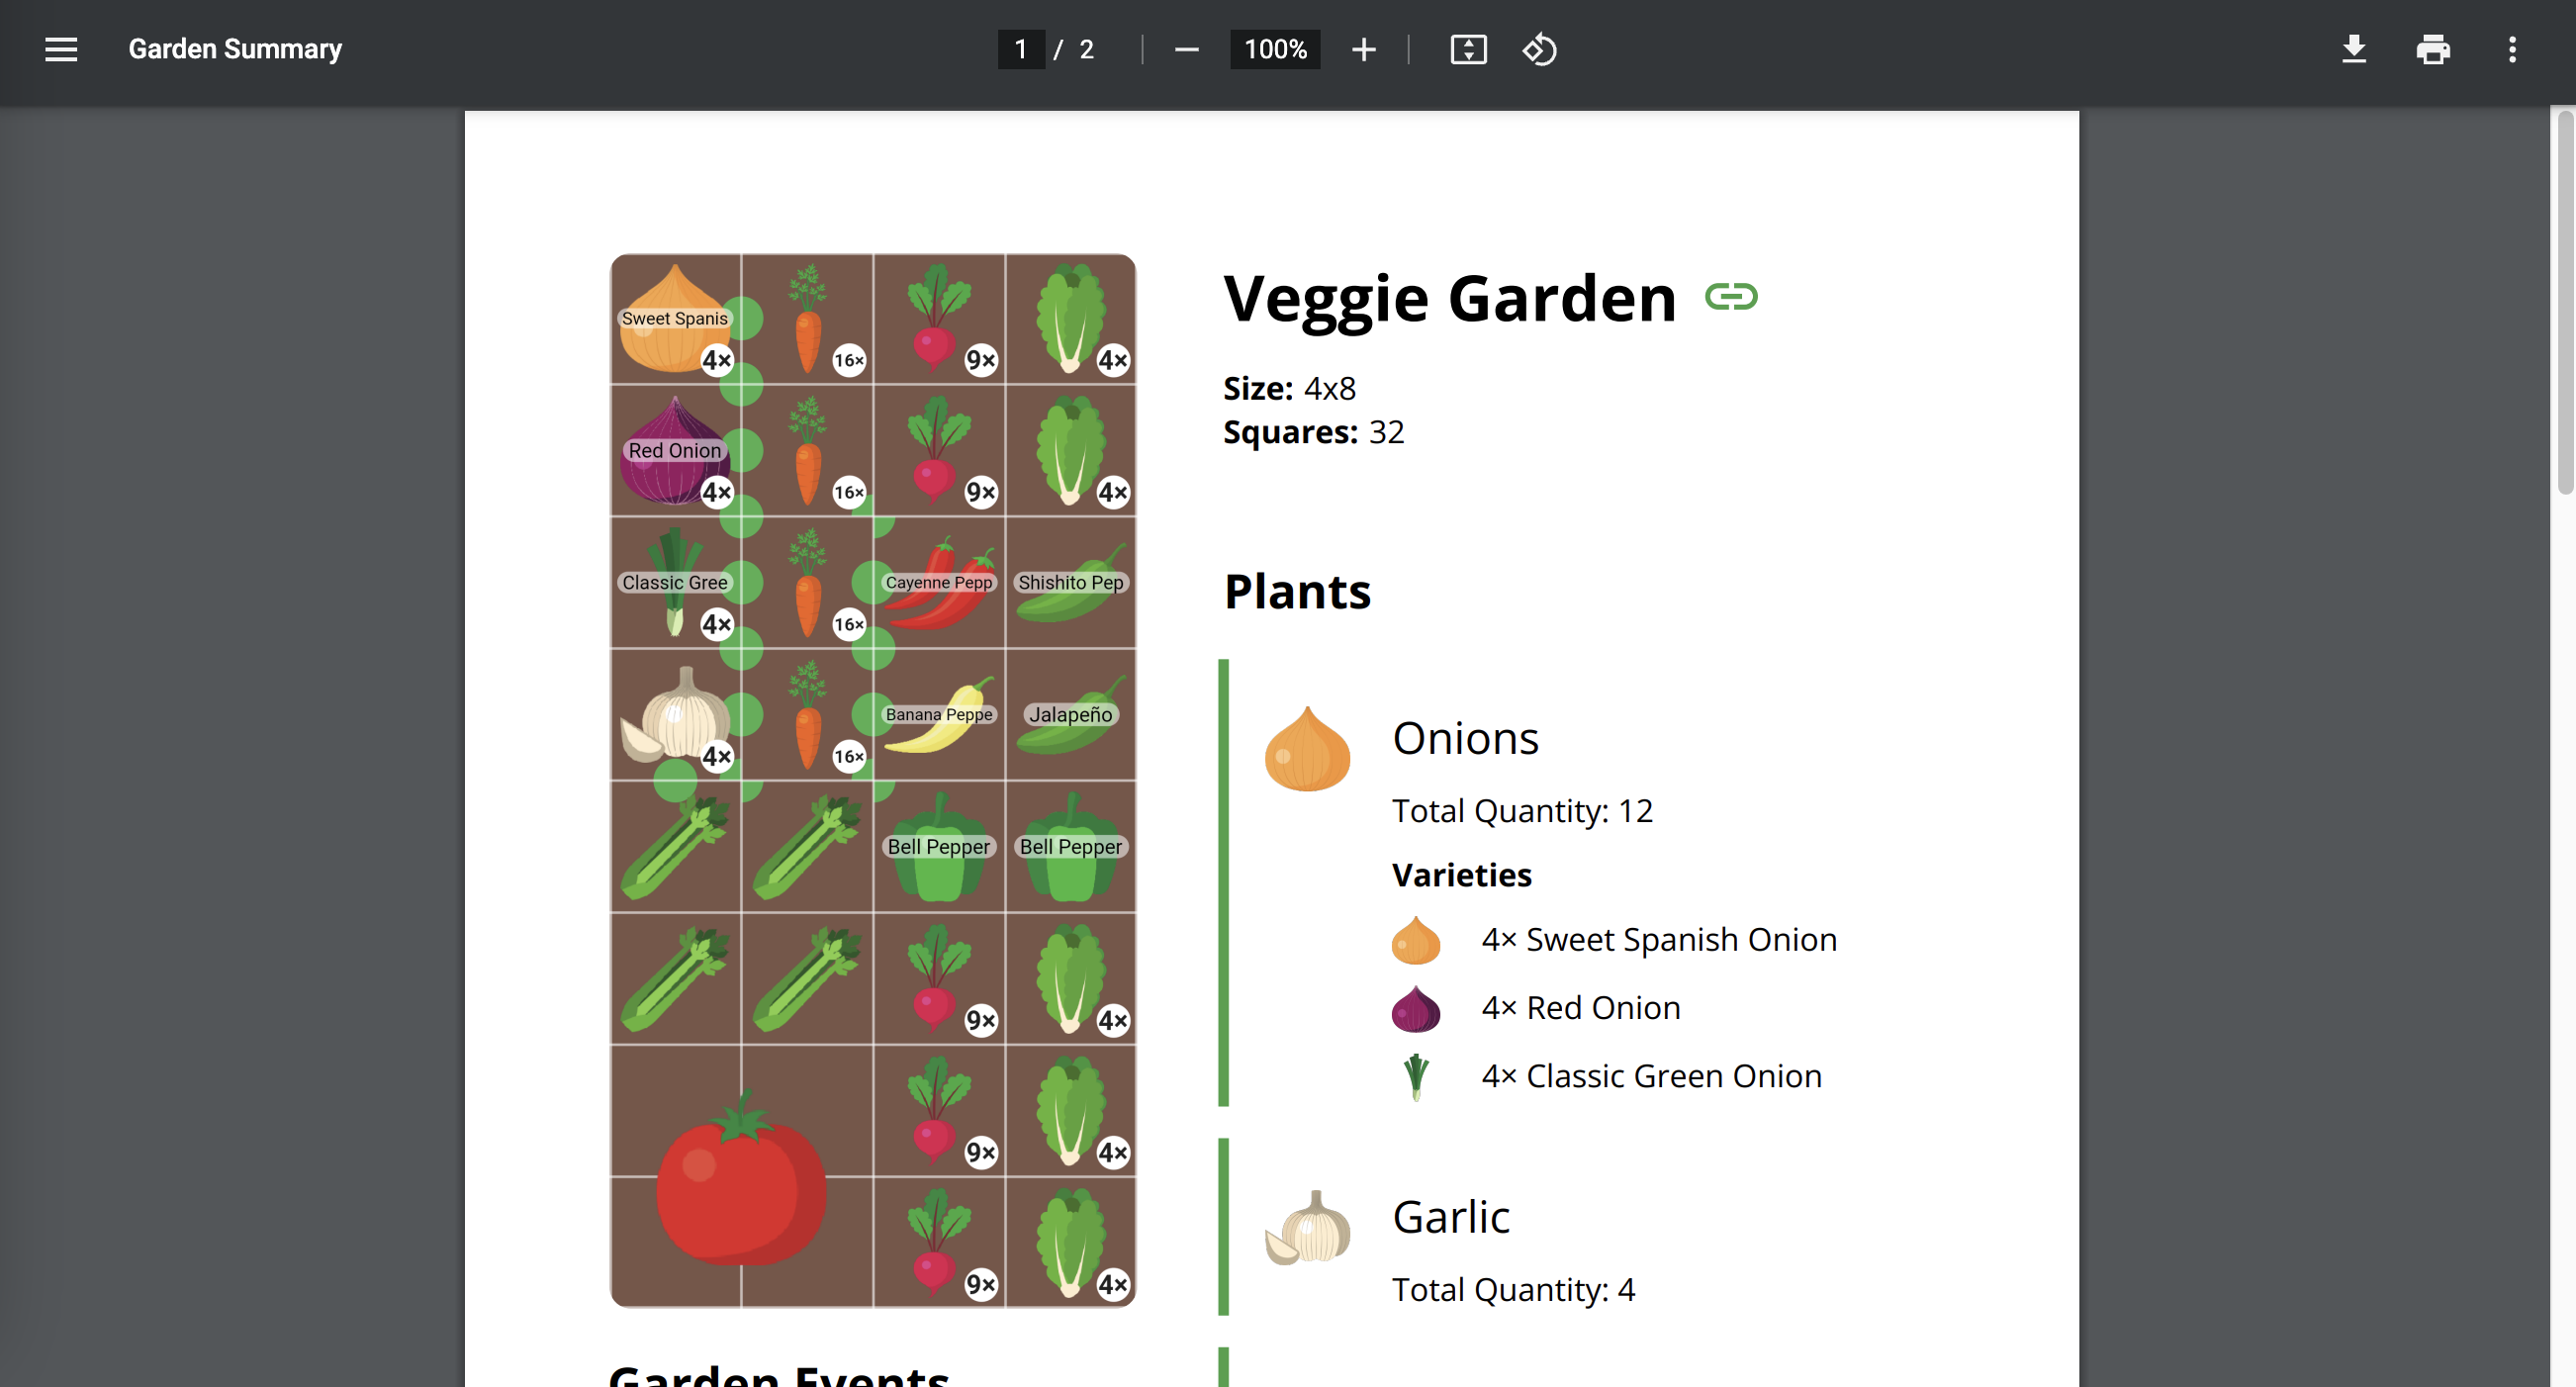 The downloaded Garden Summary PDF.